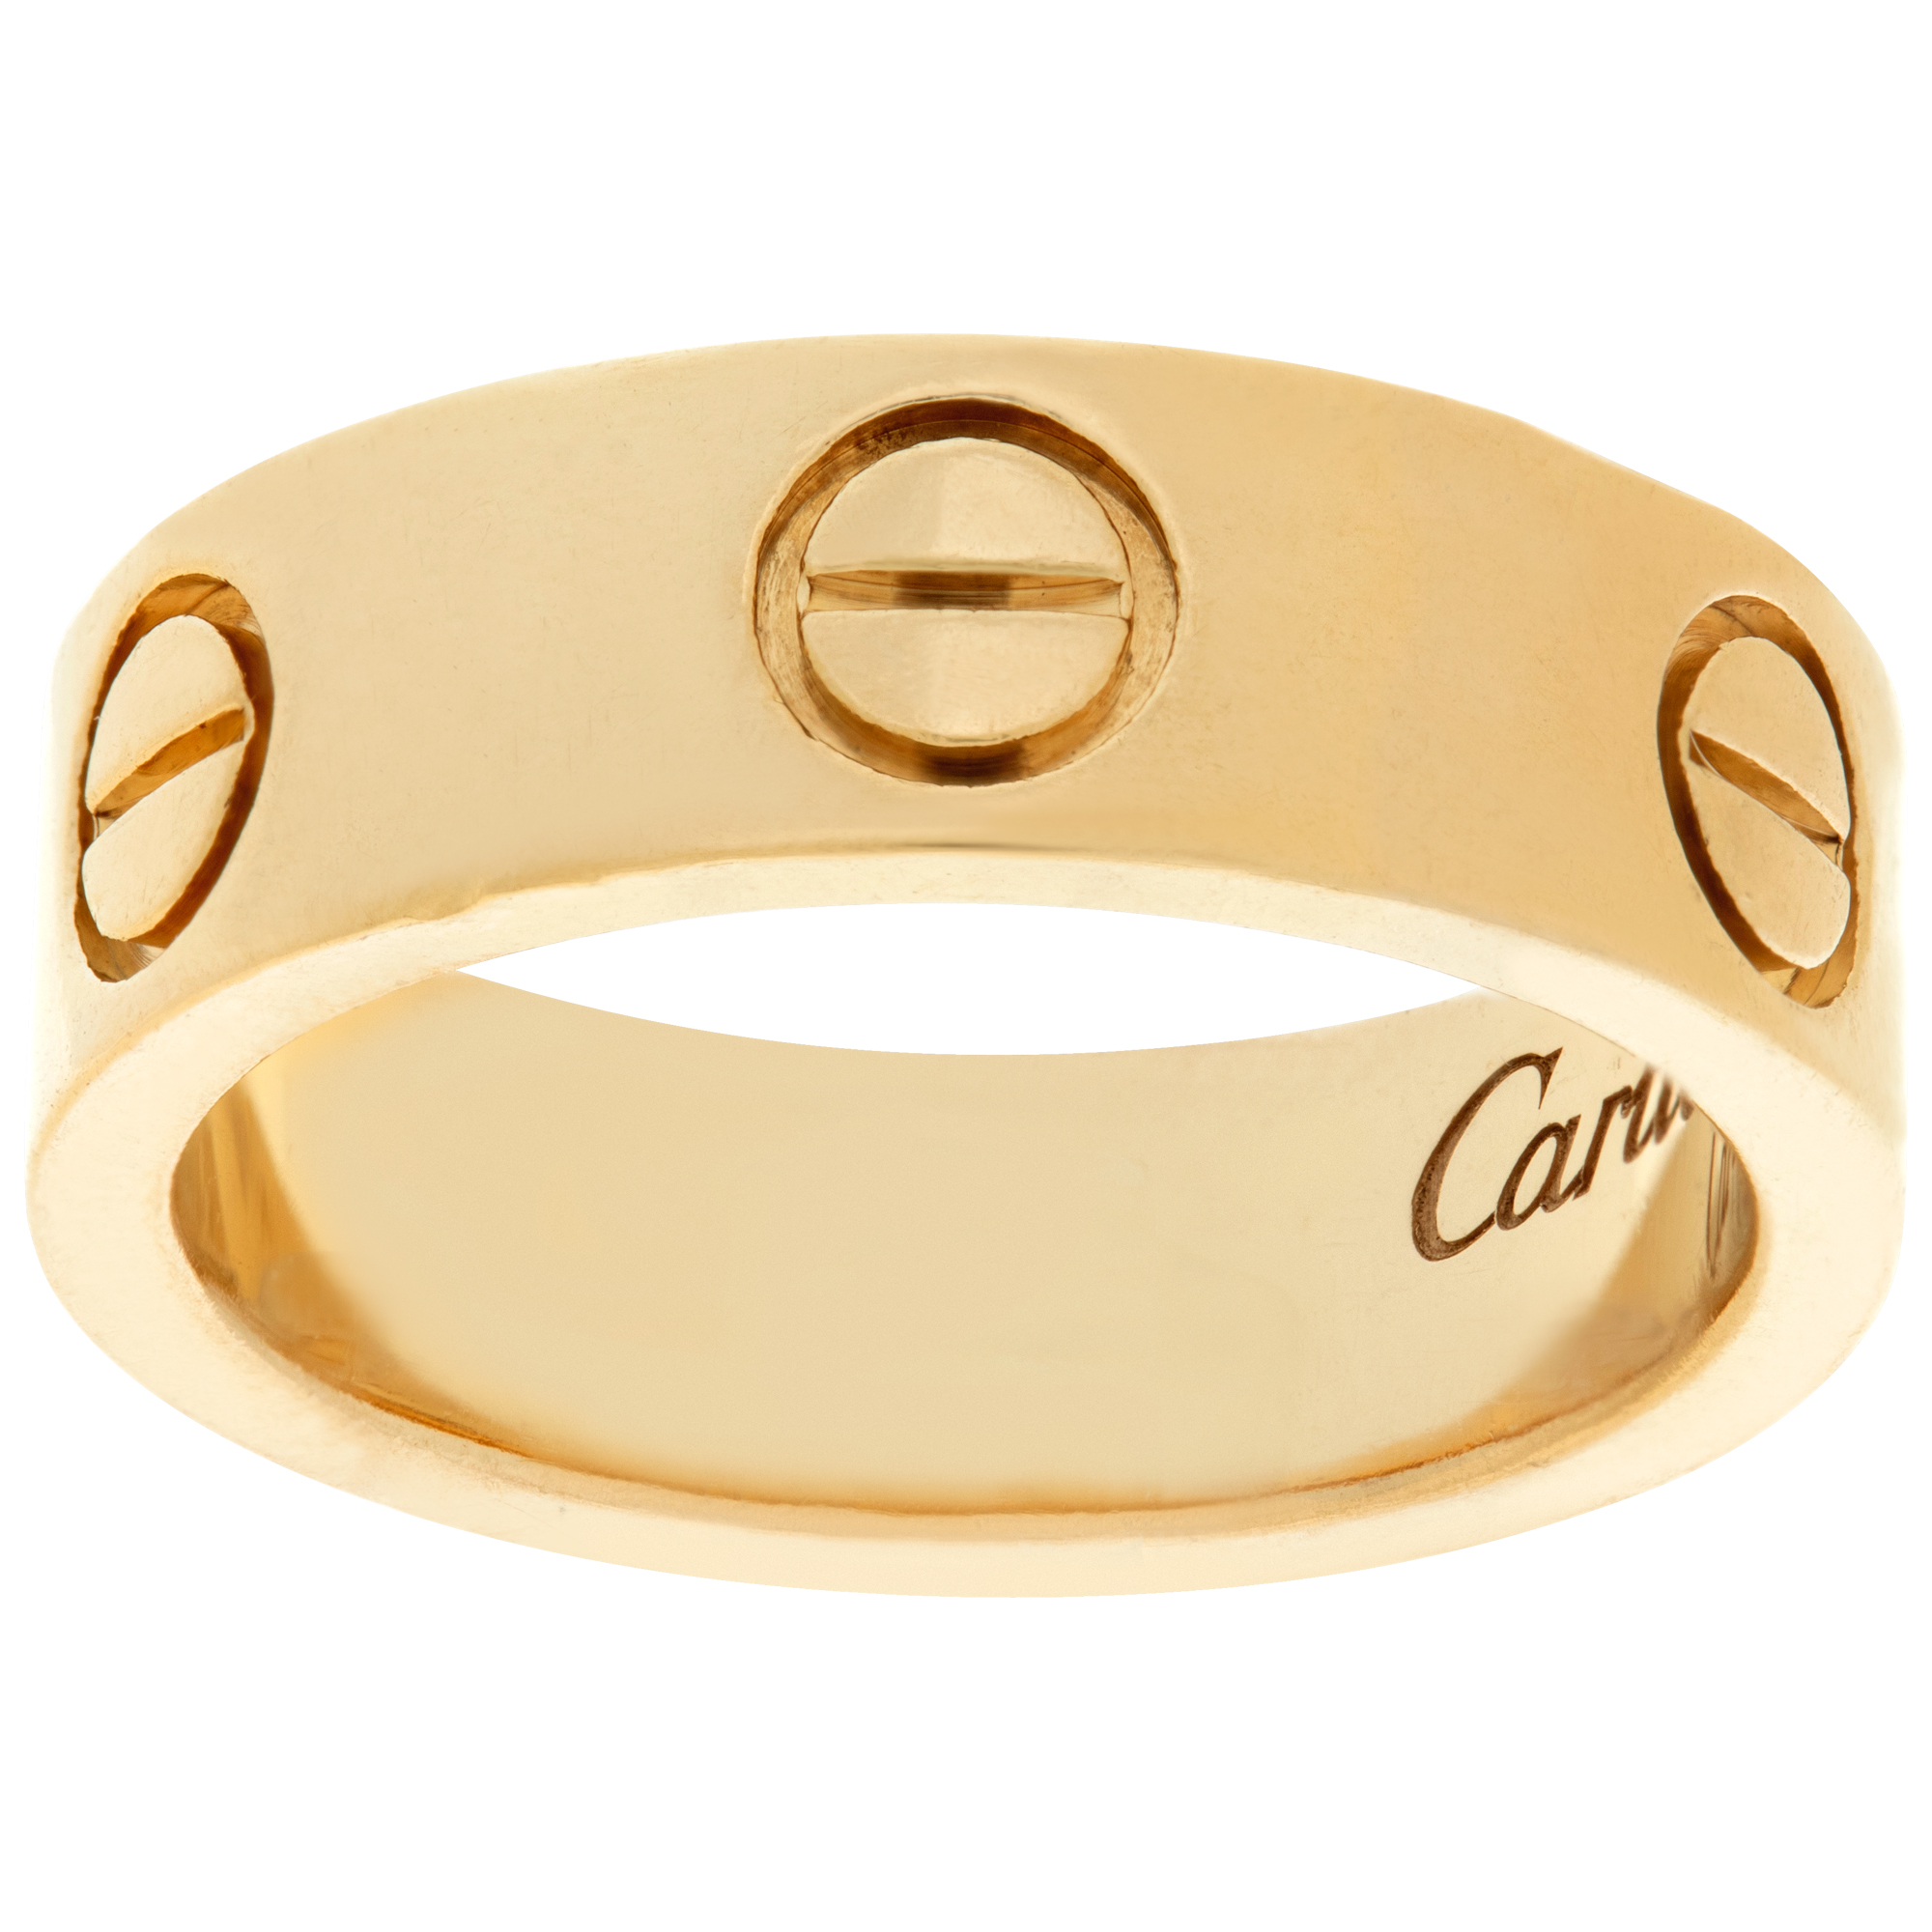 Cartier Love ring in 18k yellow gold, size 6, width 6mm.